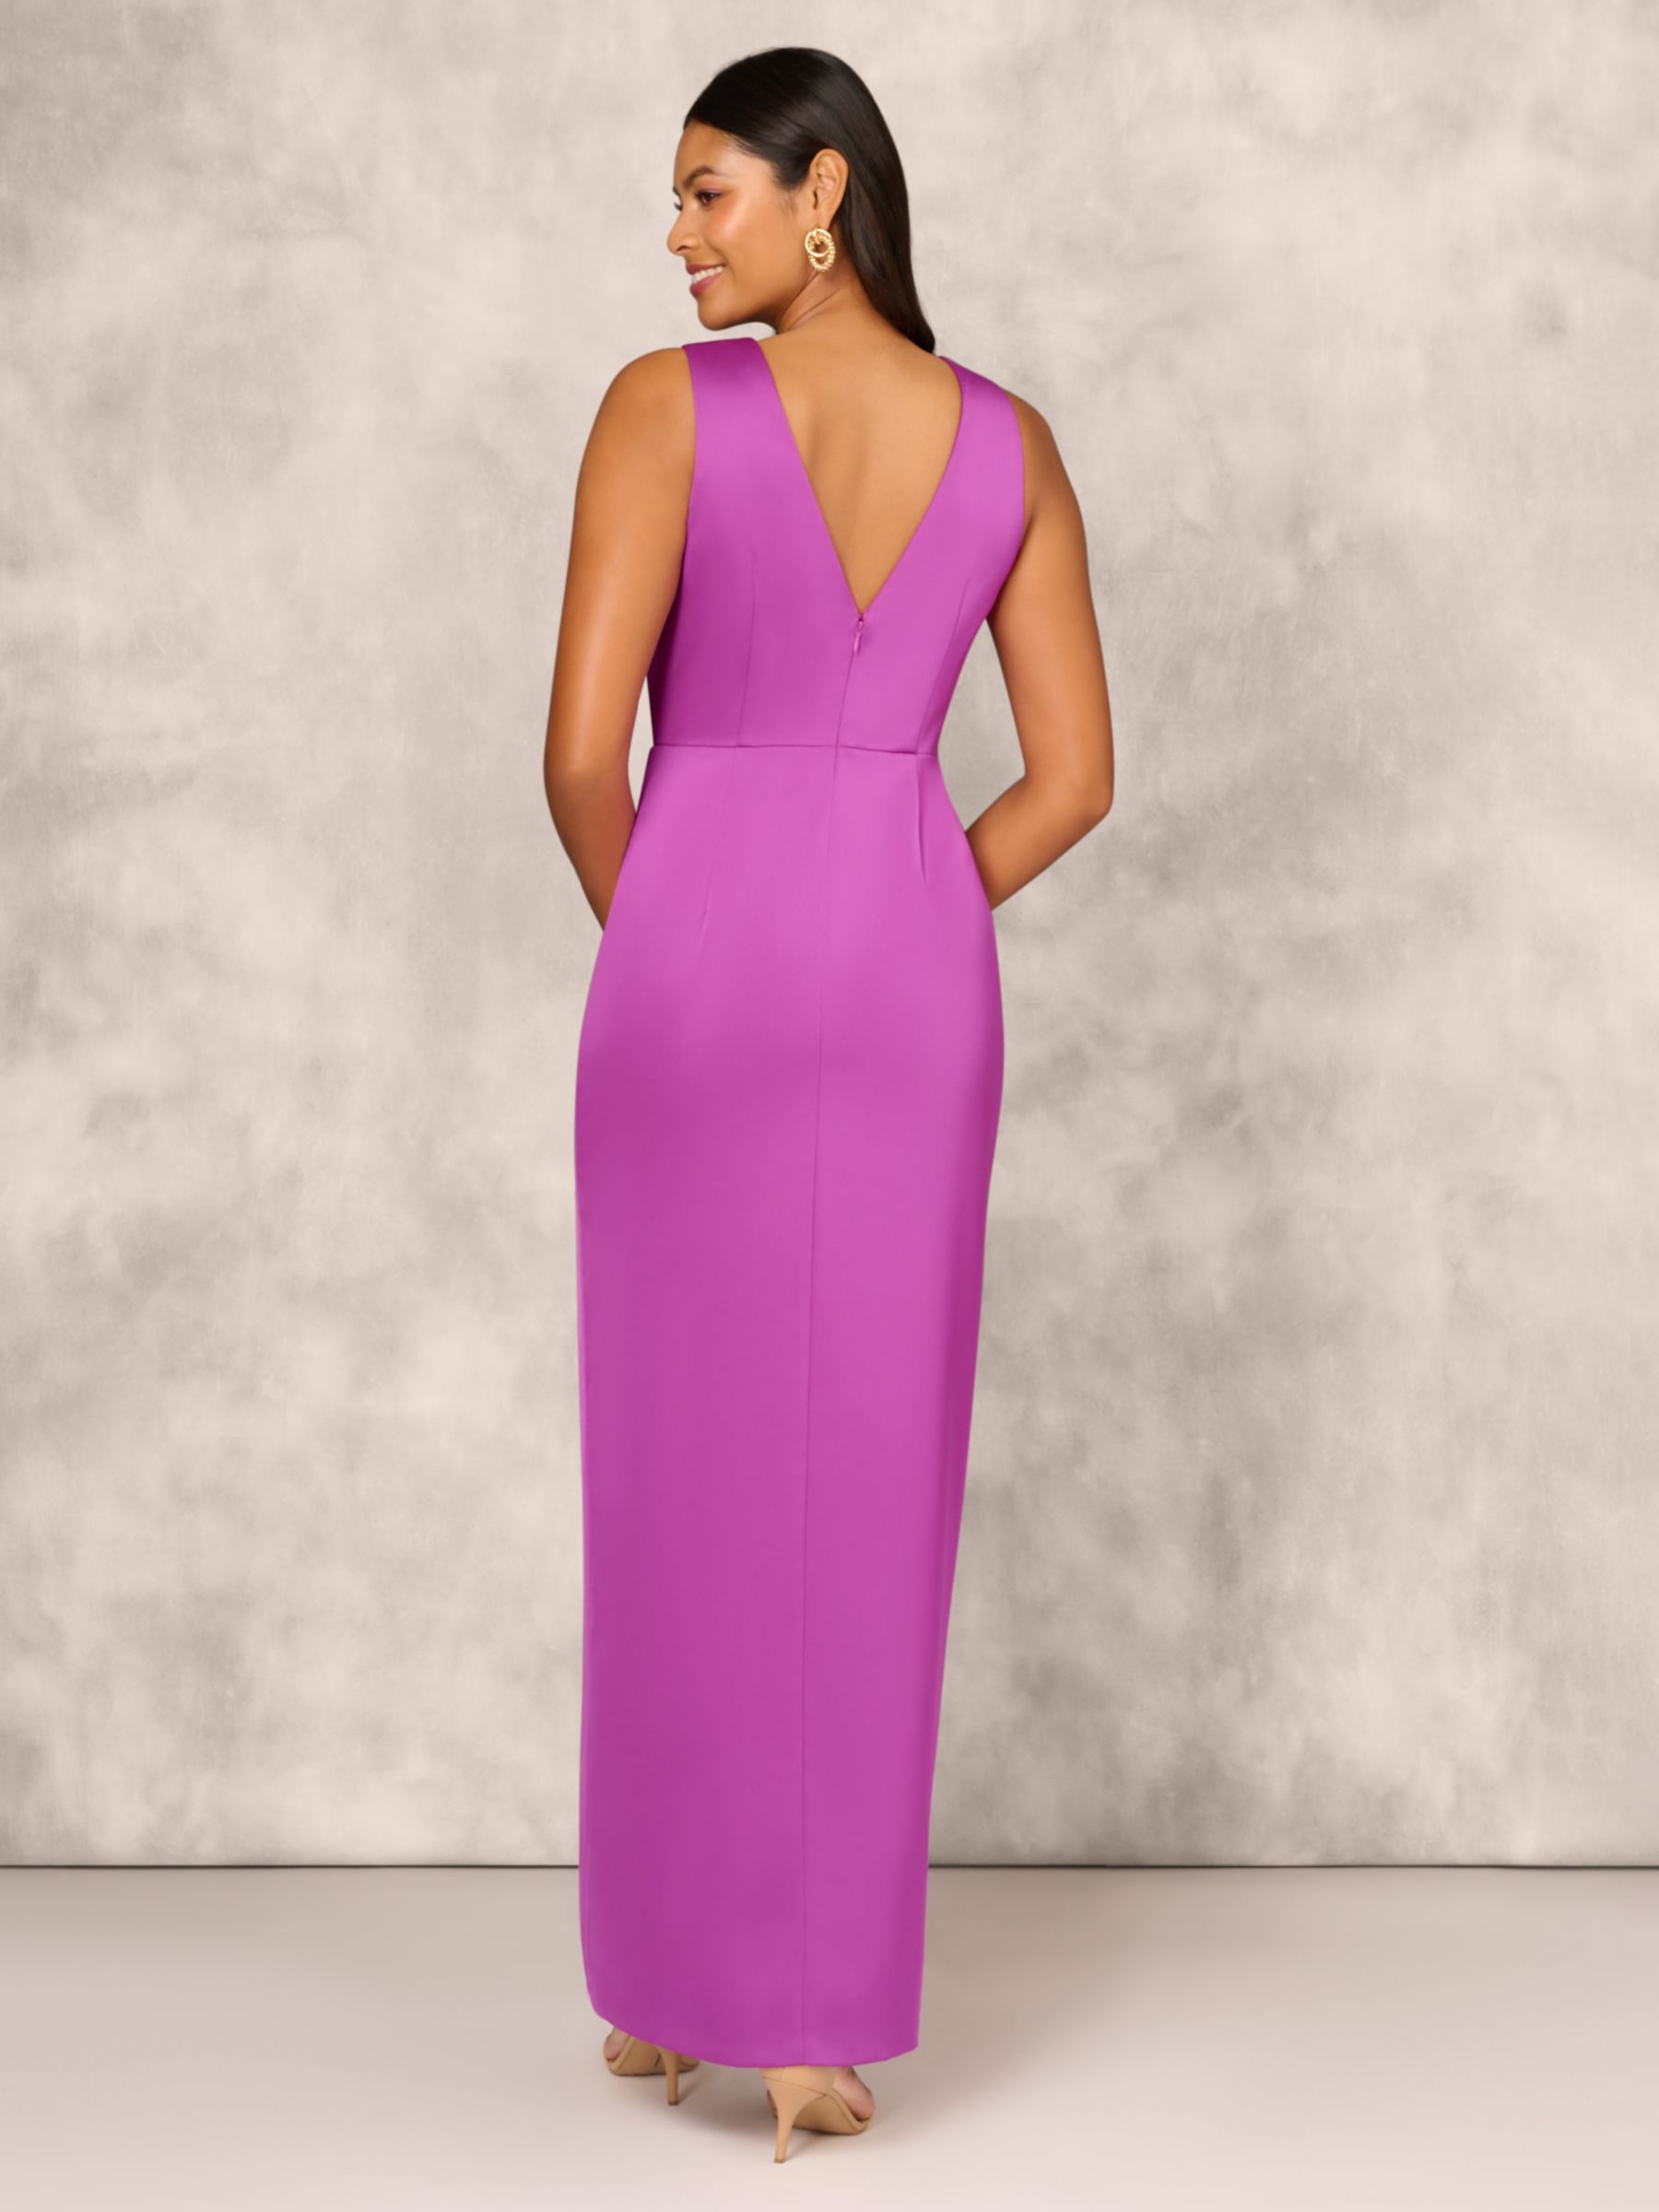 Buy Aidan Mattox by Adrianna Papell Crepe Back Satin Column Maxi Dress, Wild Orchid Online at johnlewis.com